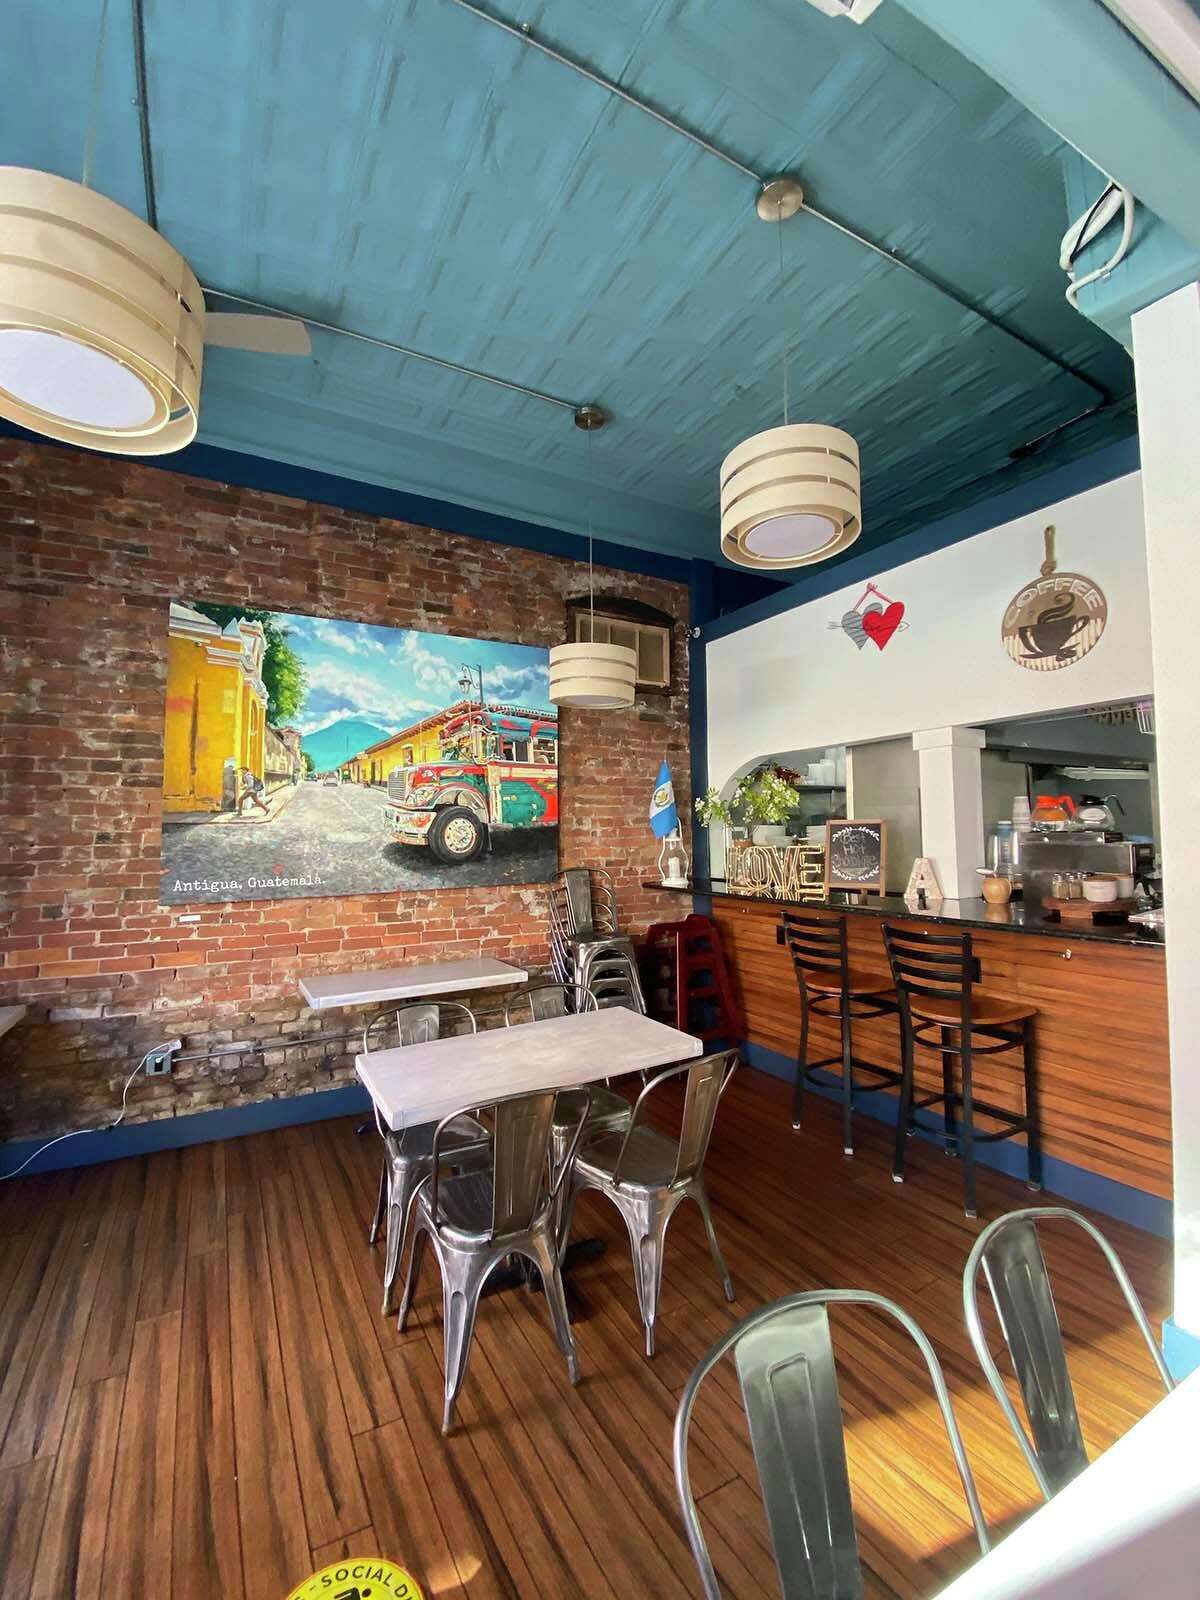 Aurora’s sunny space on Capitol Avenue in Hartford features bright artwork paying homage to the owners’ home country of Guatemala.